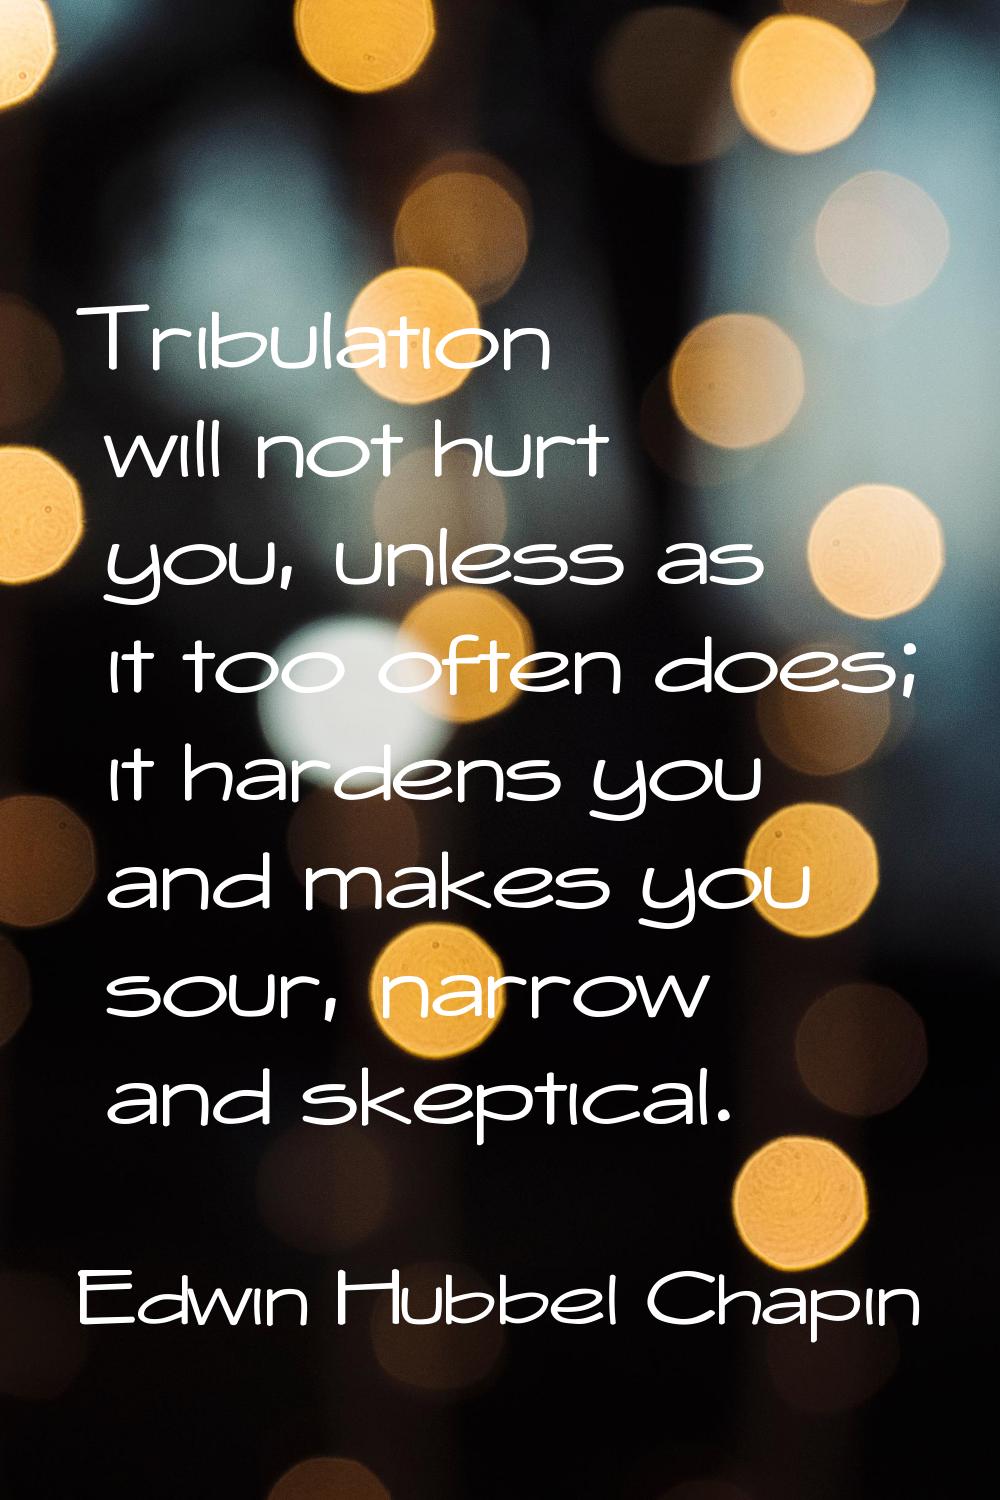 Tribulation will not hurt you, unless as it too often does; it hardens you and makes you sour, narr